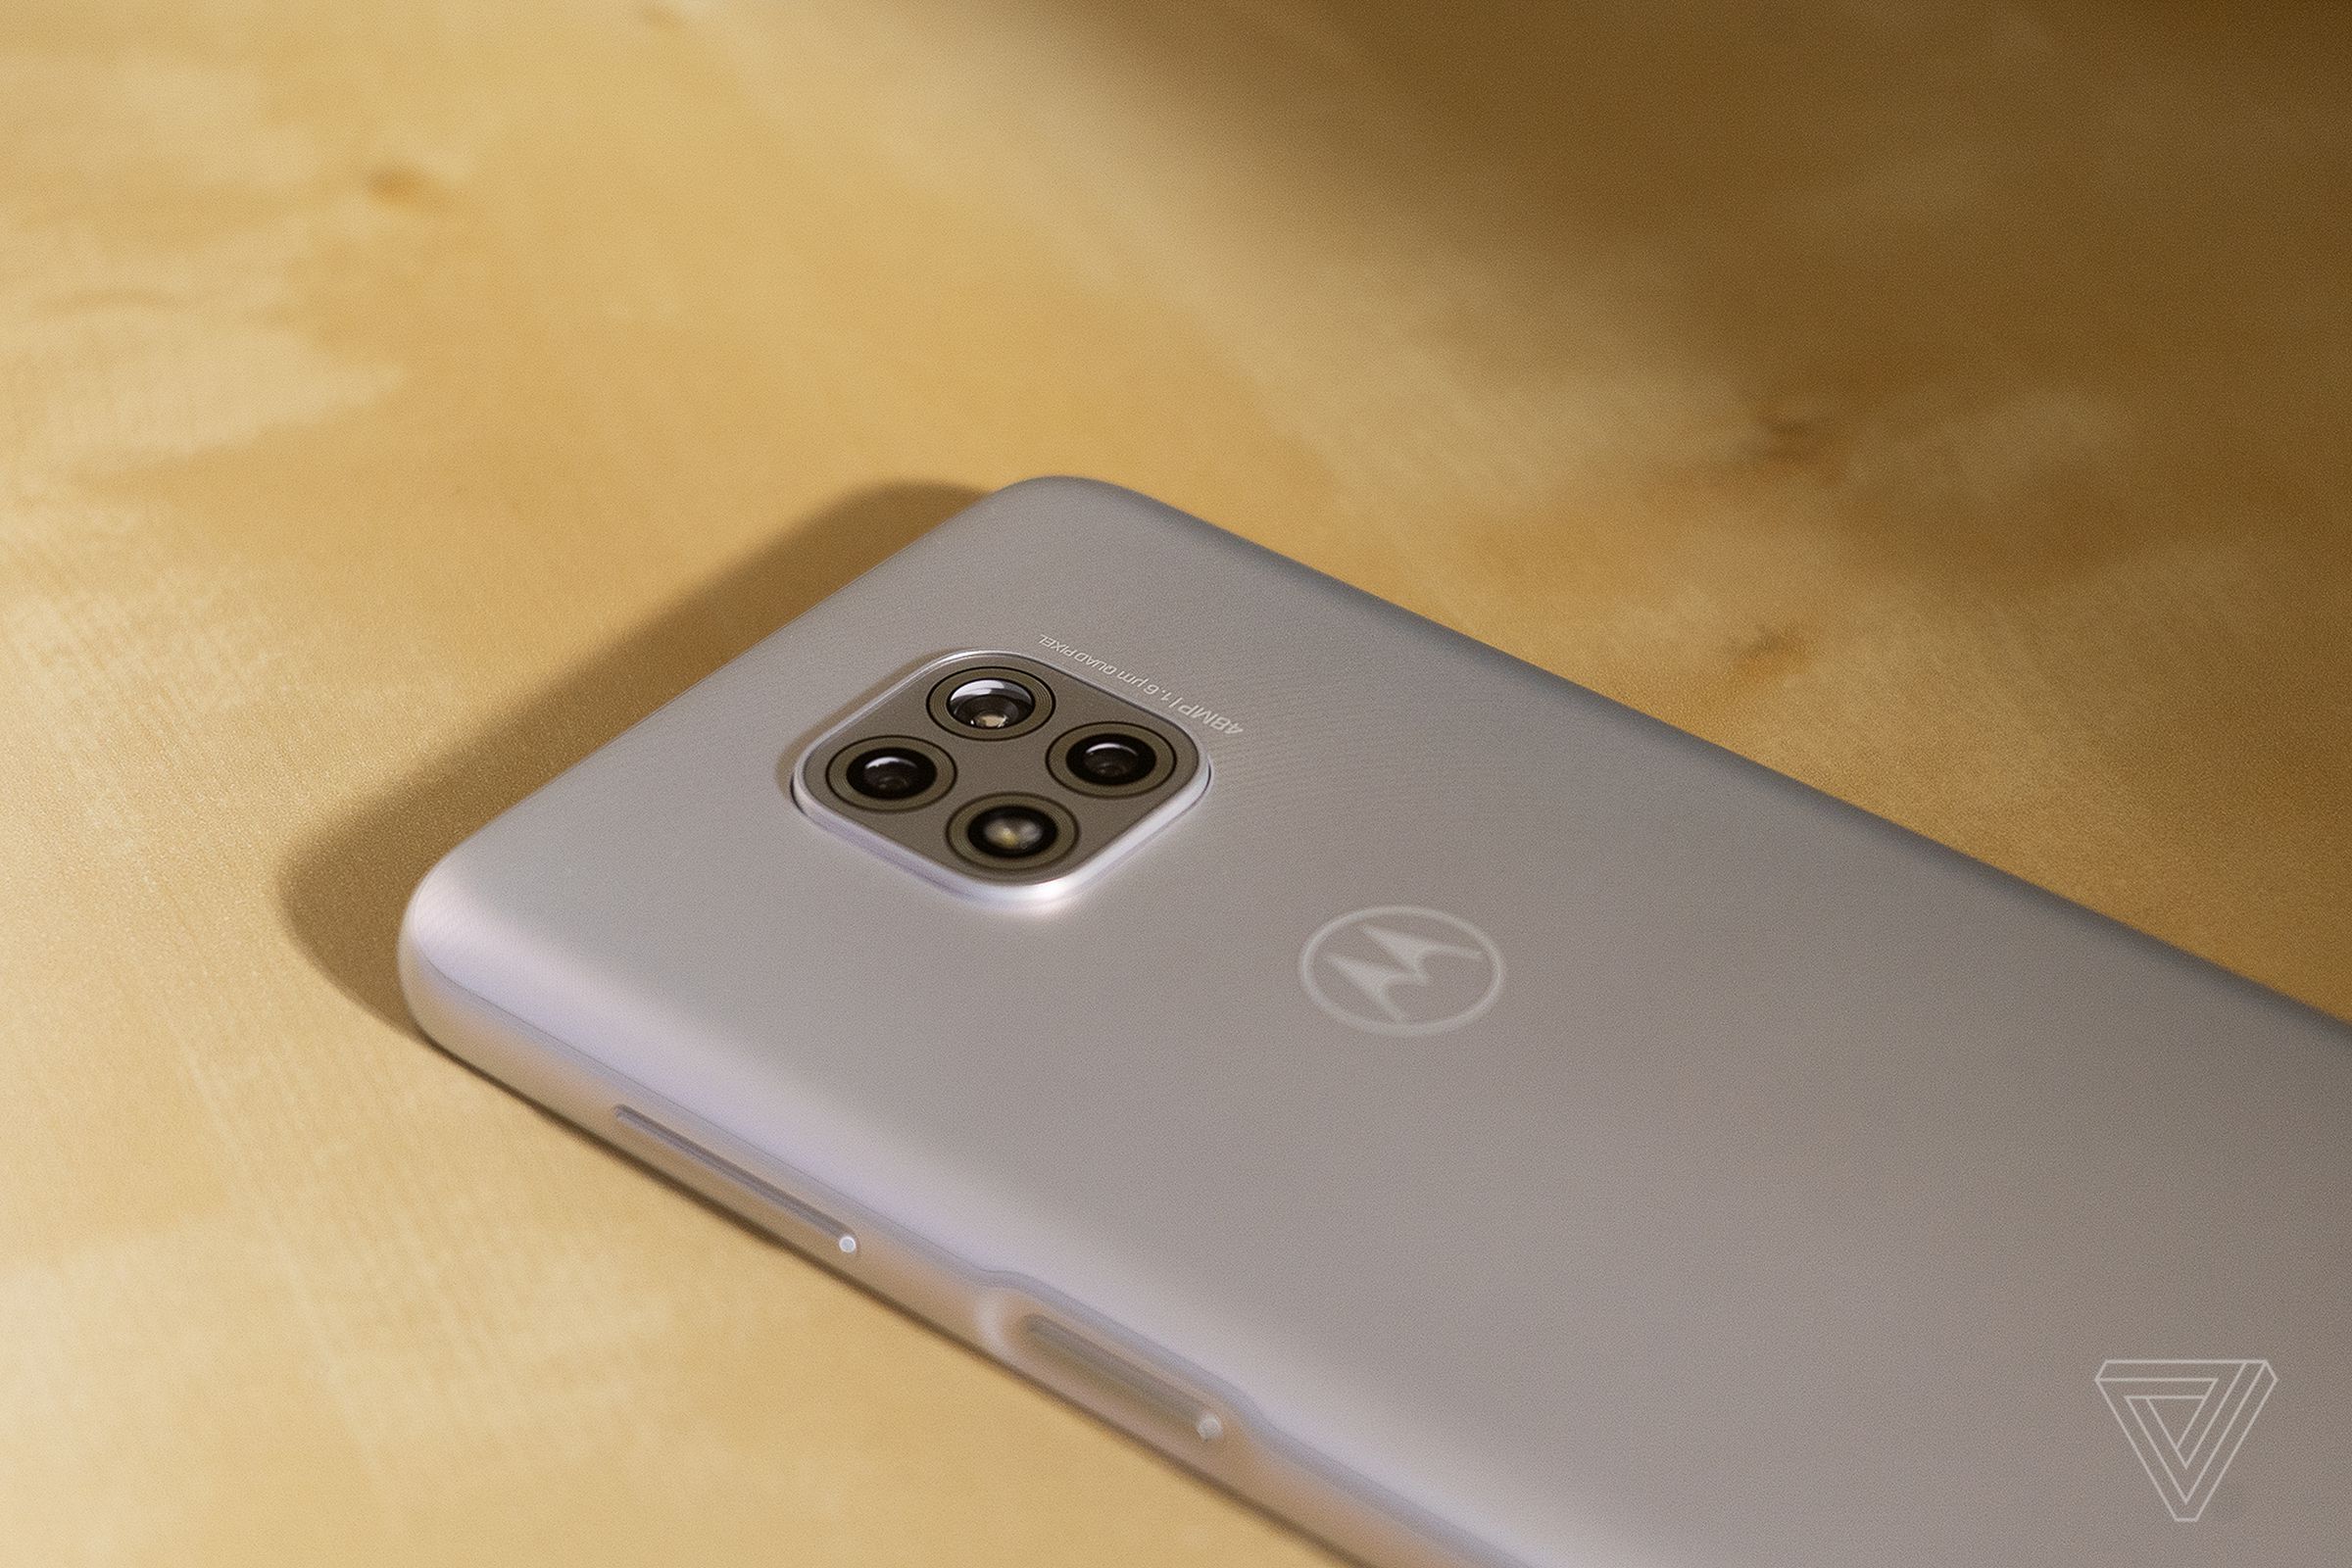 Cameras on the Moto G Power include a standard wide, ultrawide, and a depth sensor for portrait mode photos.